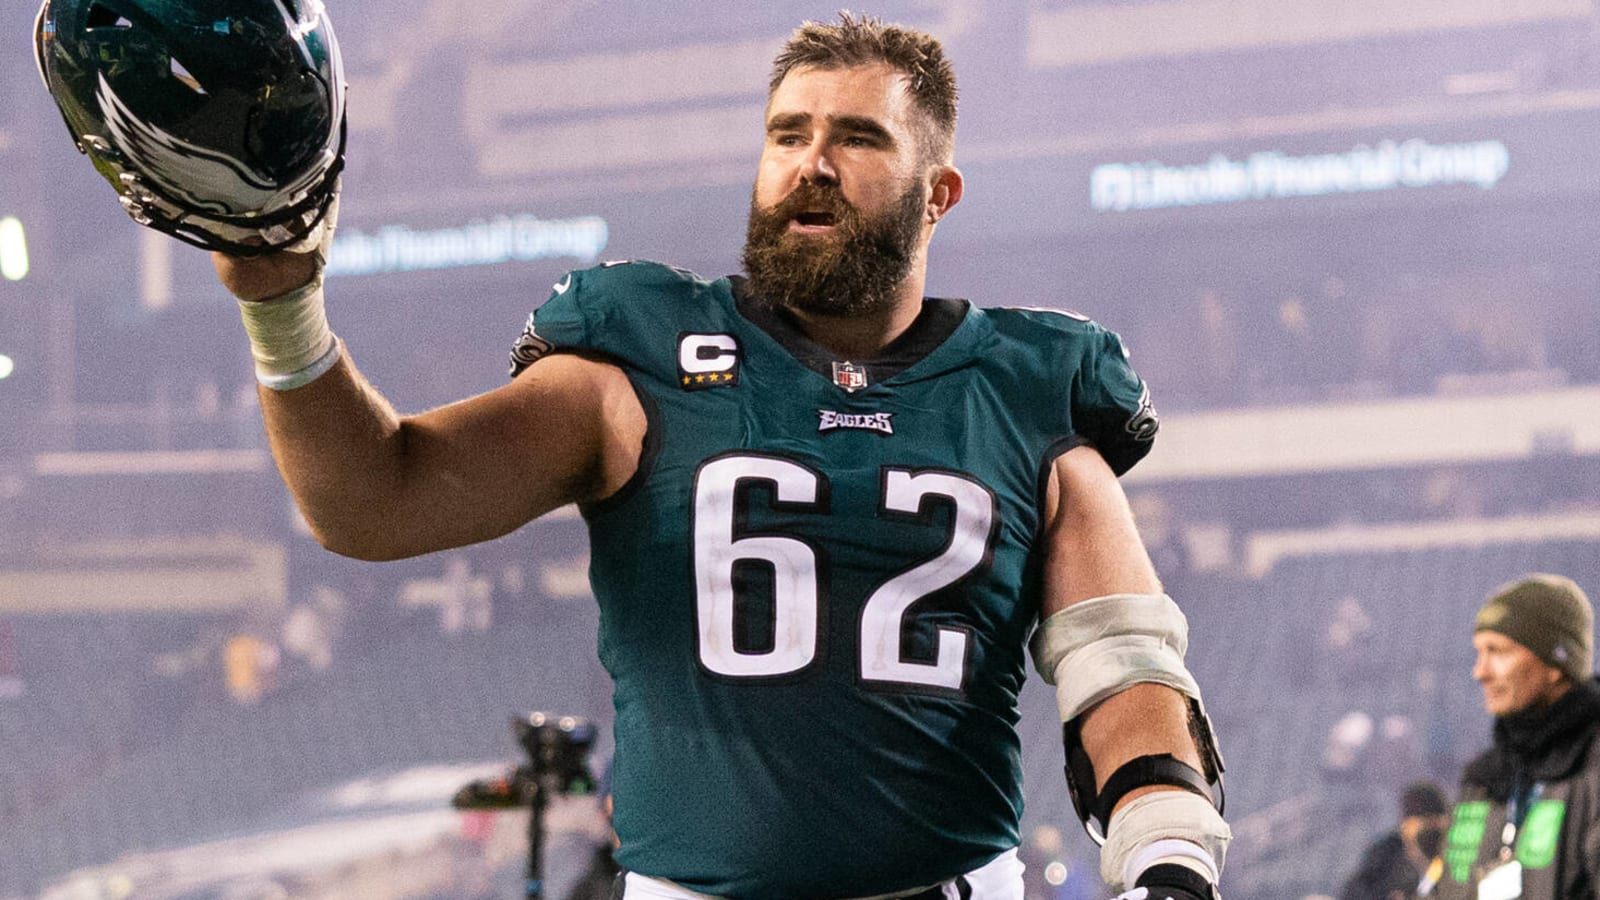 Eagles center Jason Kelce: 'I’m playing until I’m not'